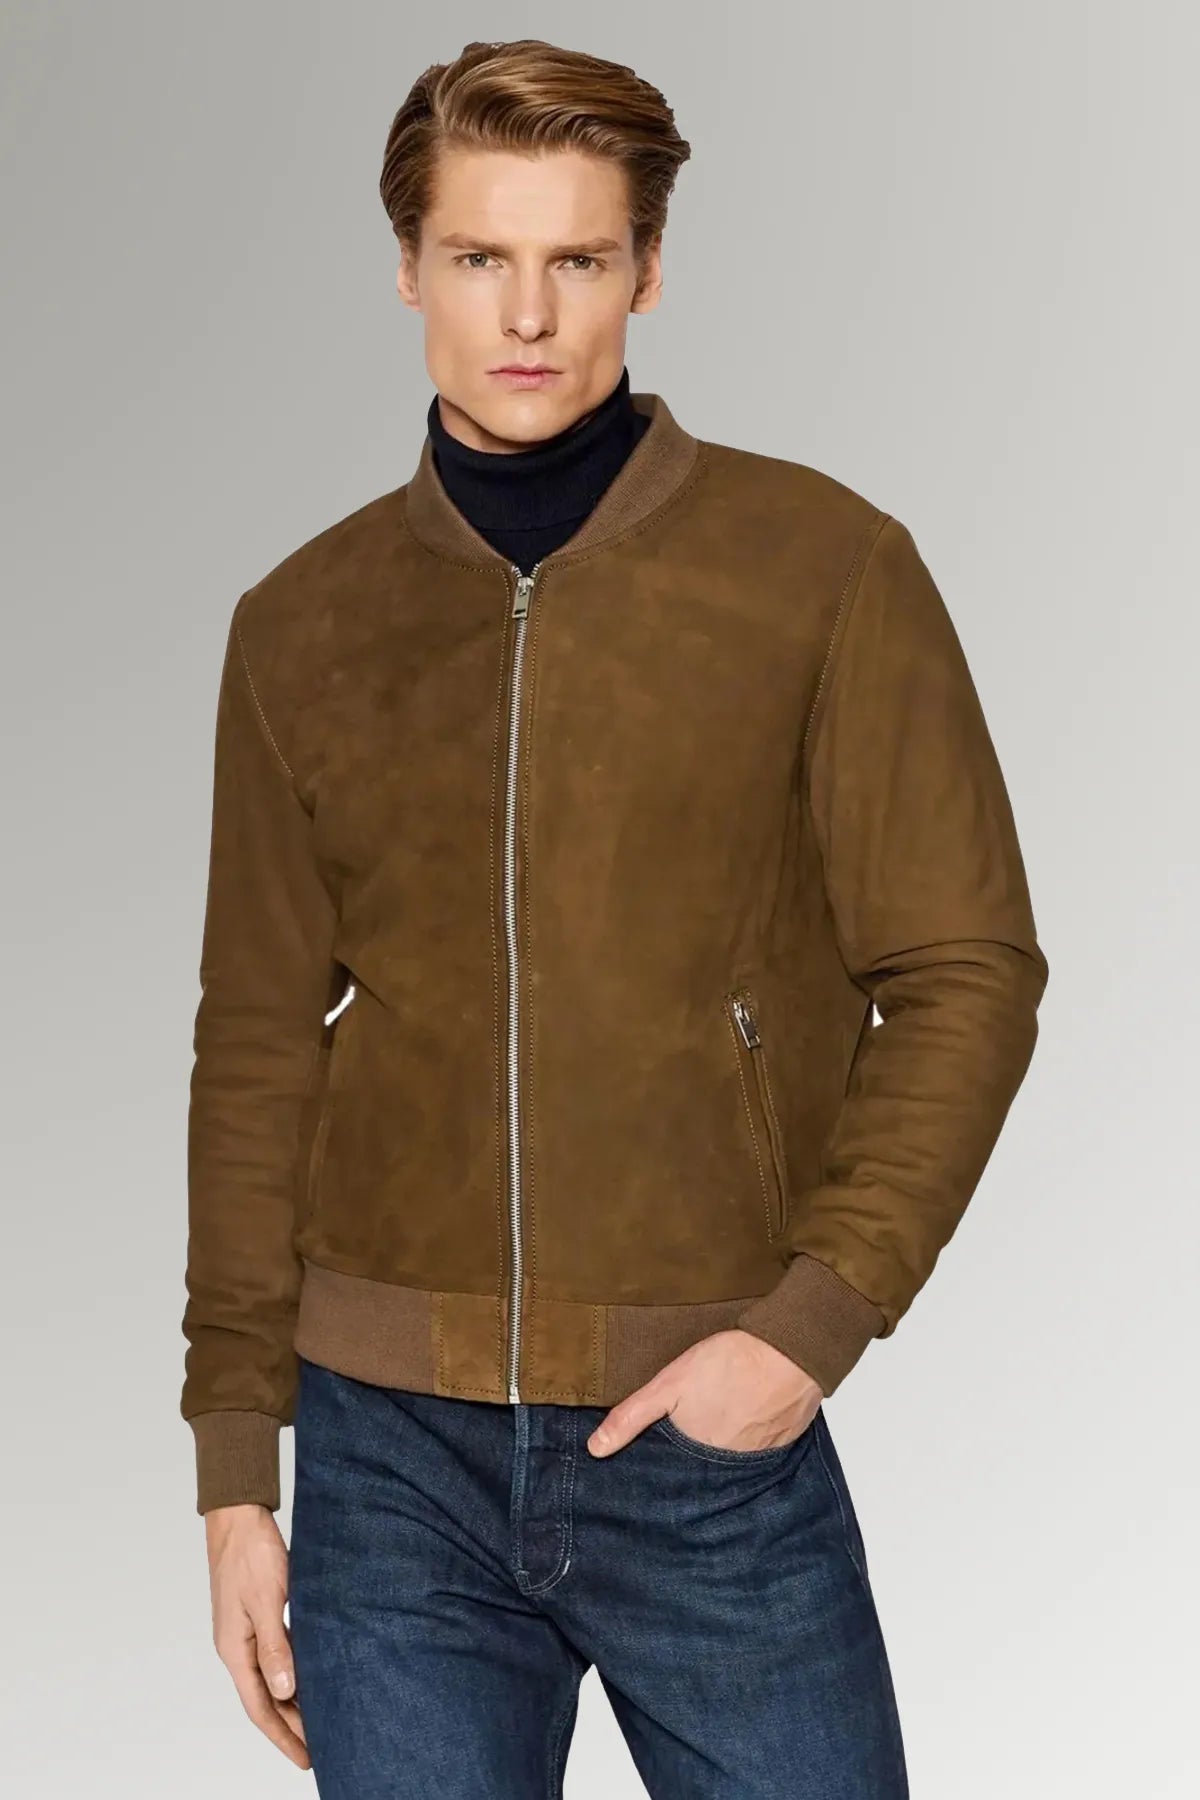 Men's Brown Ripped suede Leather Jacket